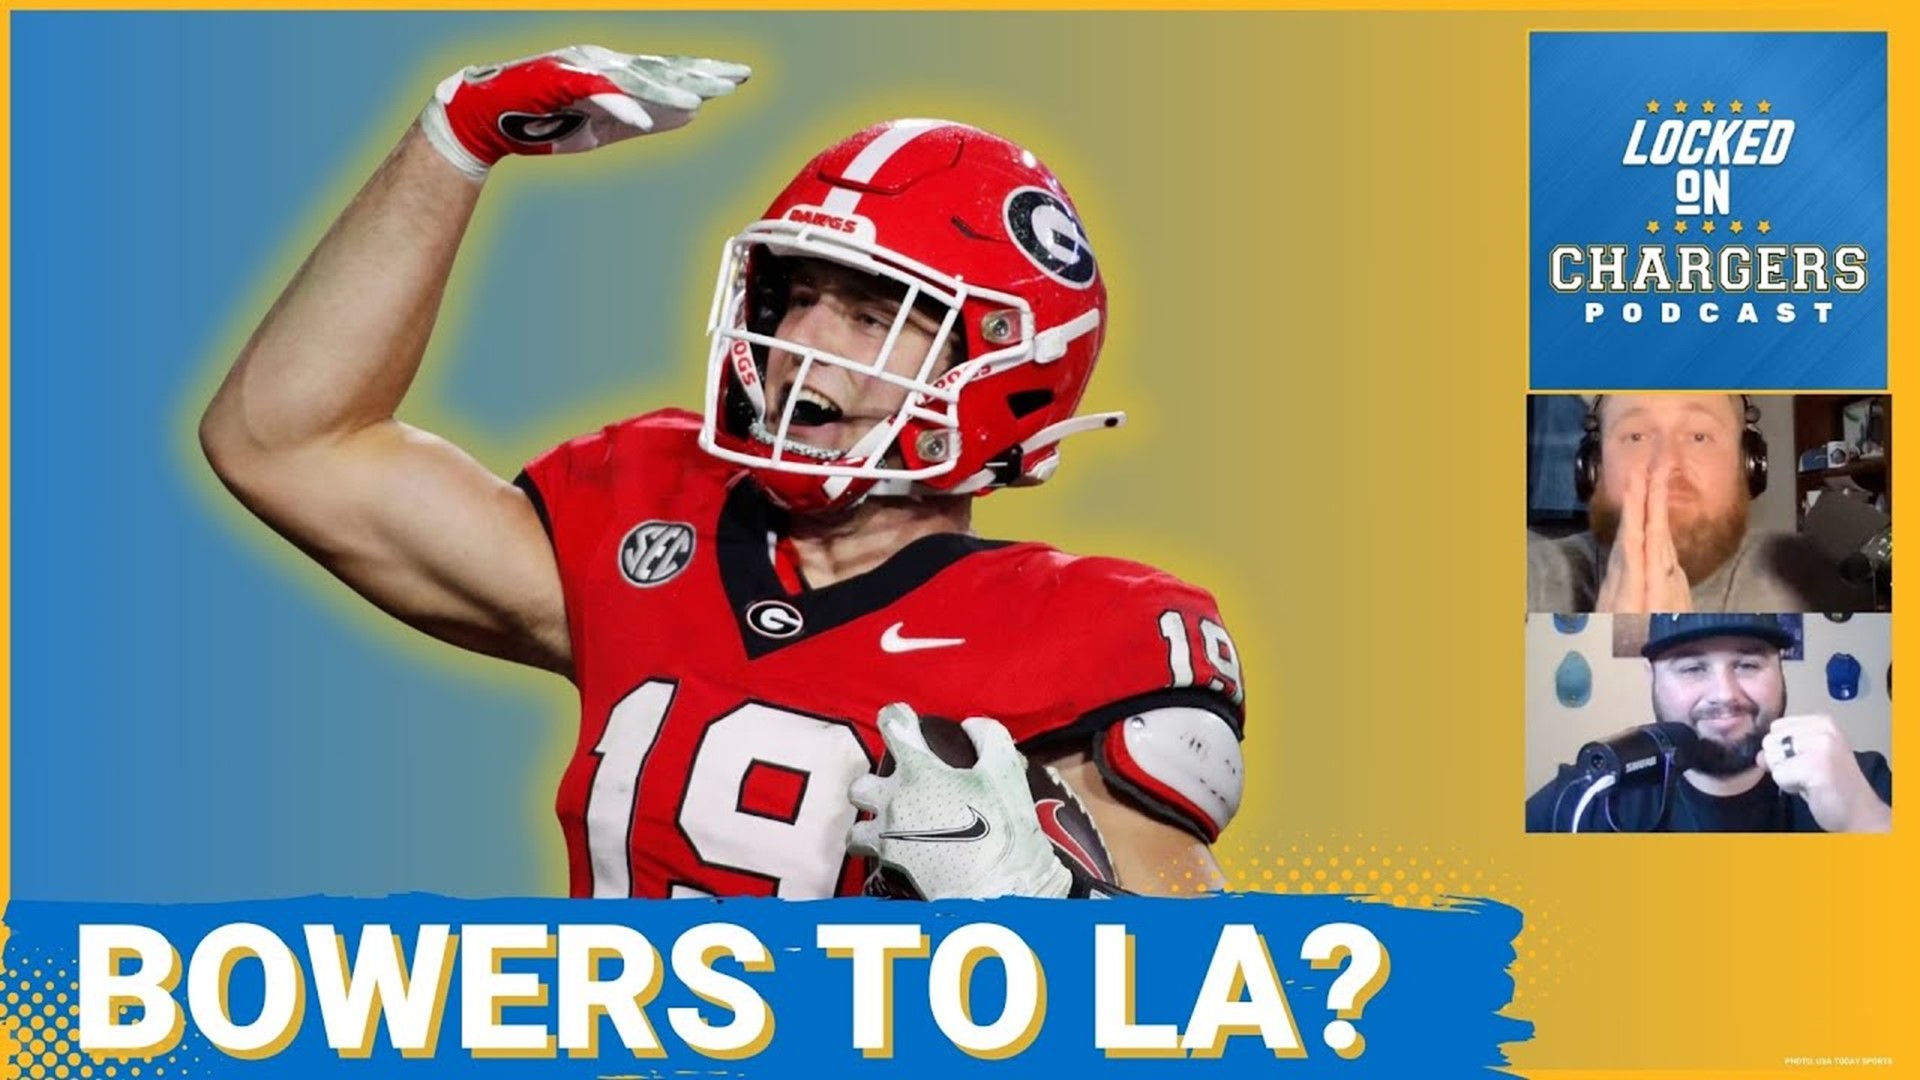 The Los Angeles Chargers will have a premium pick in the 2024 NFL Draft and the uber-productive Brock Bowers is very enticing.